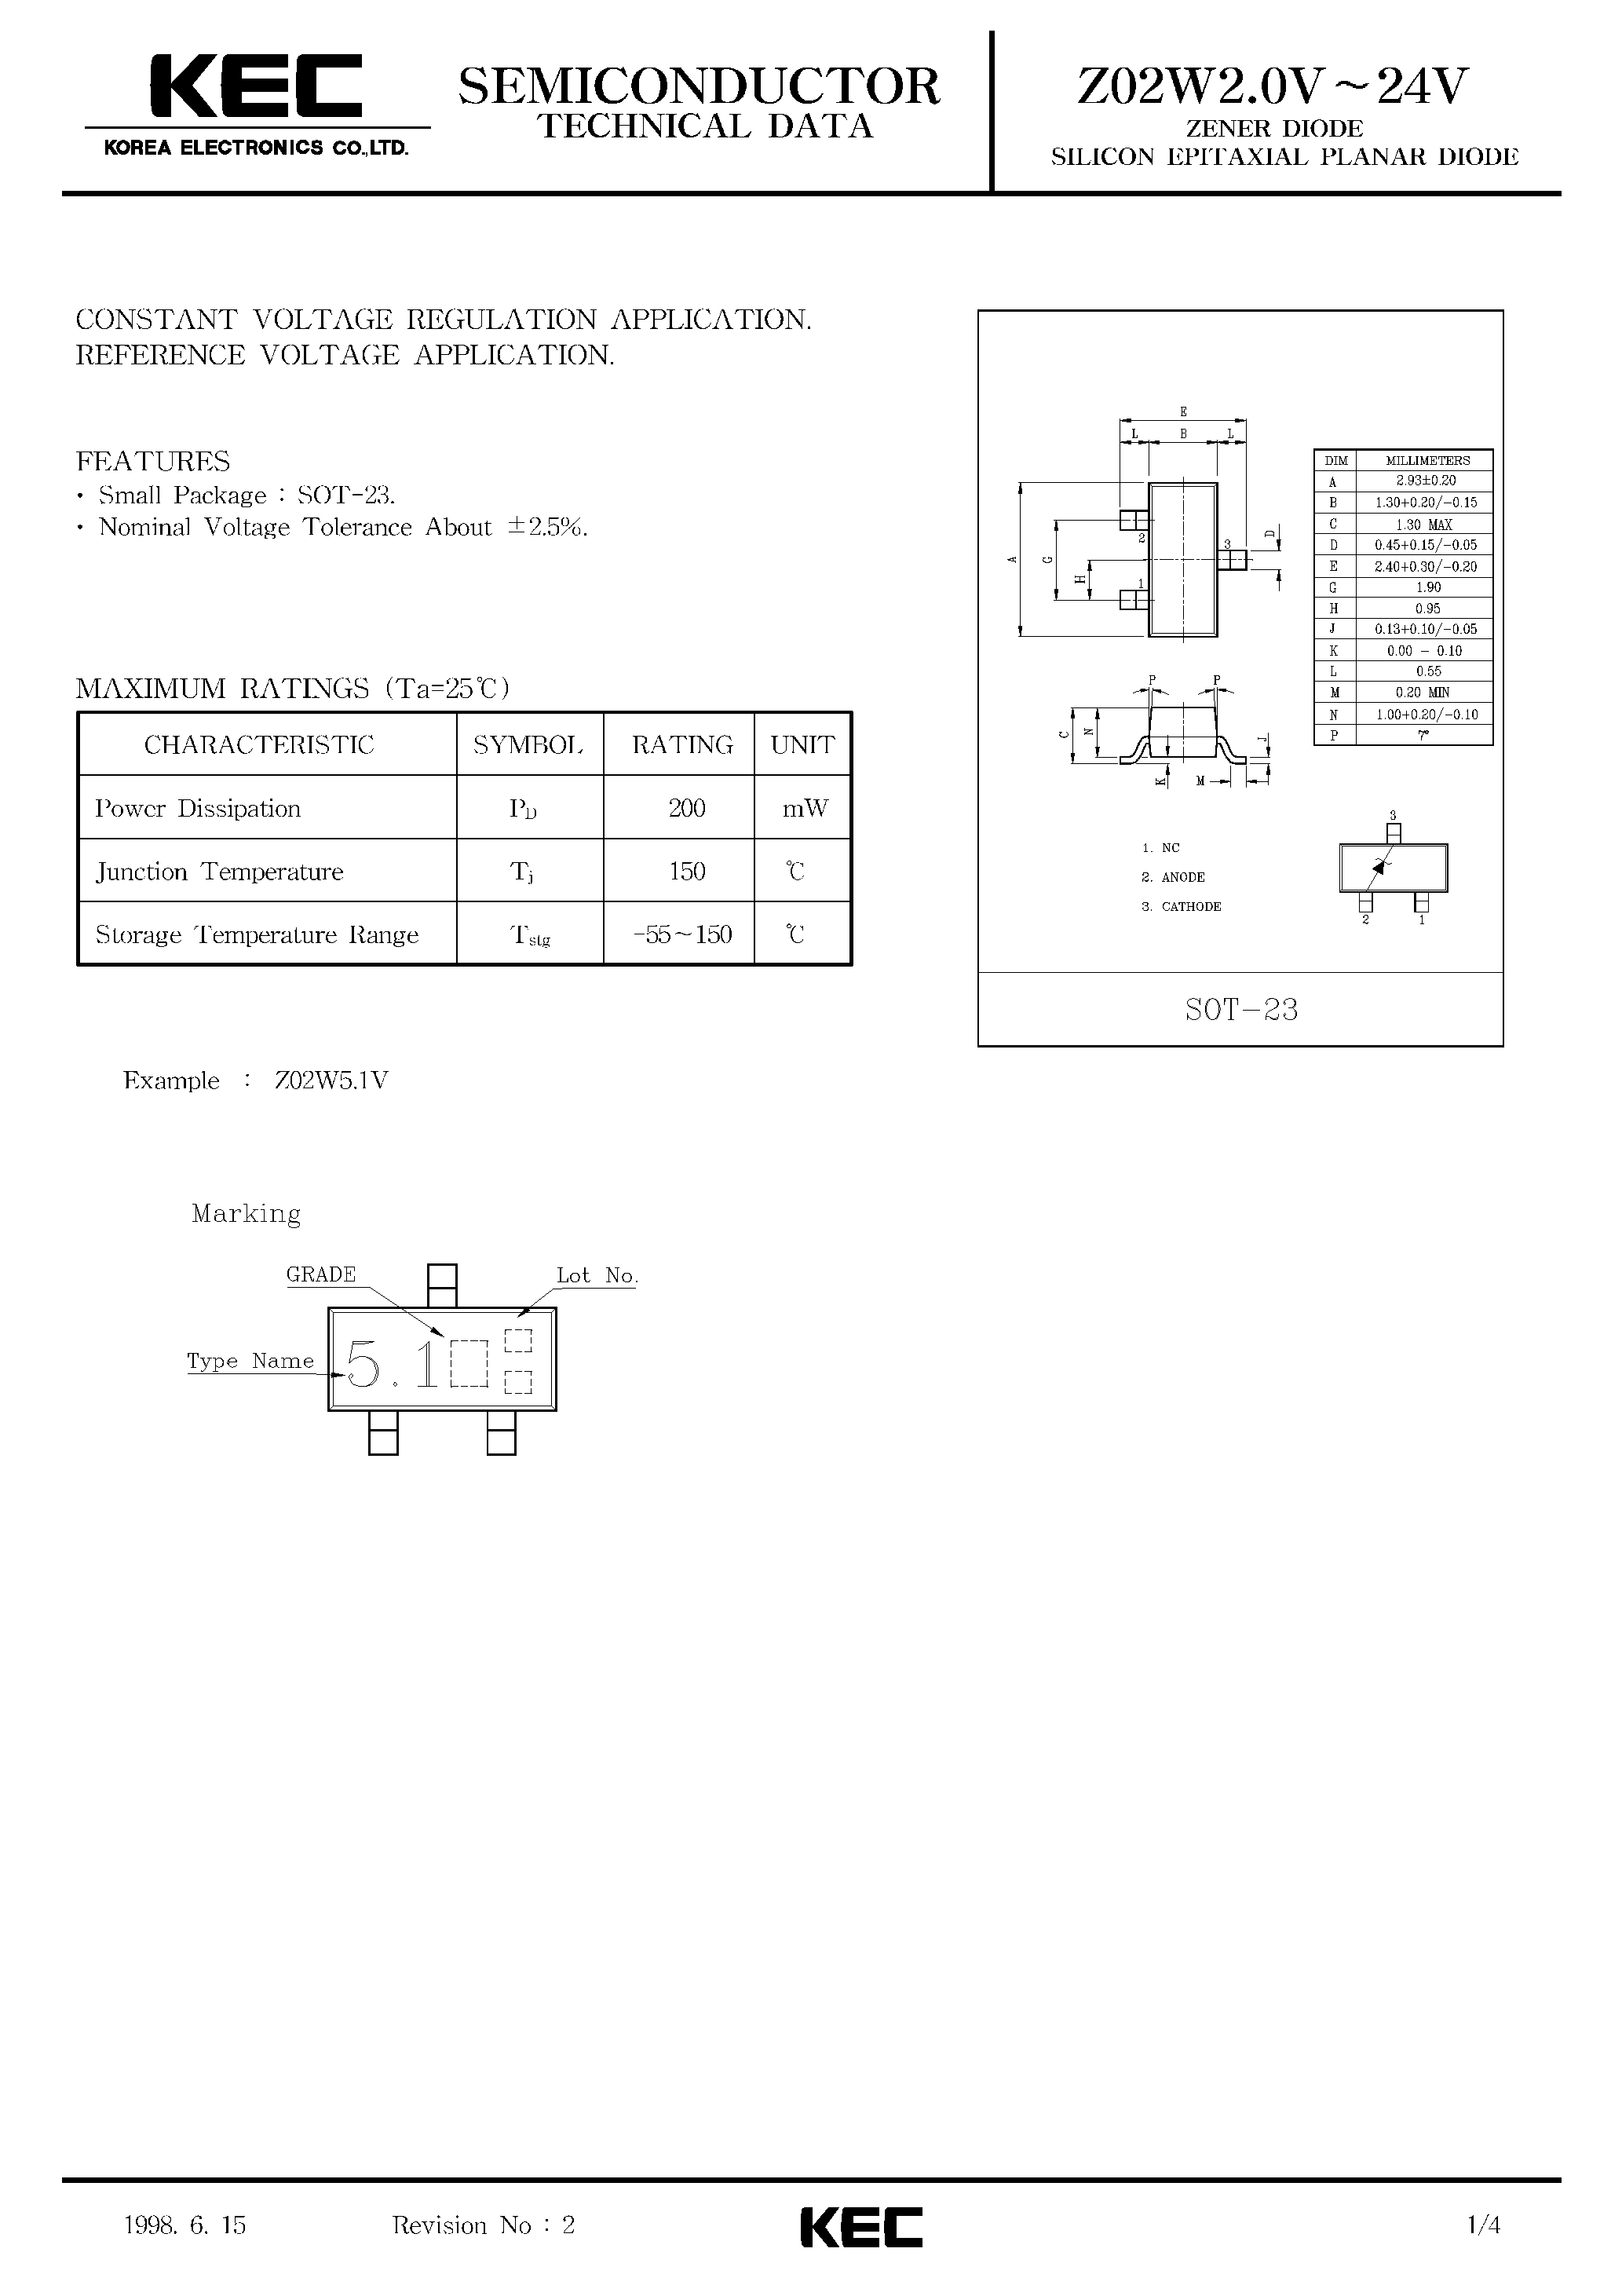 Datasheet Z02W3.0V - ZENER DIODE SILICON EPITAXIAL PLANAR DIODE page 1